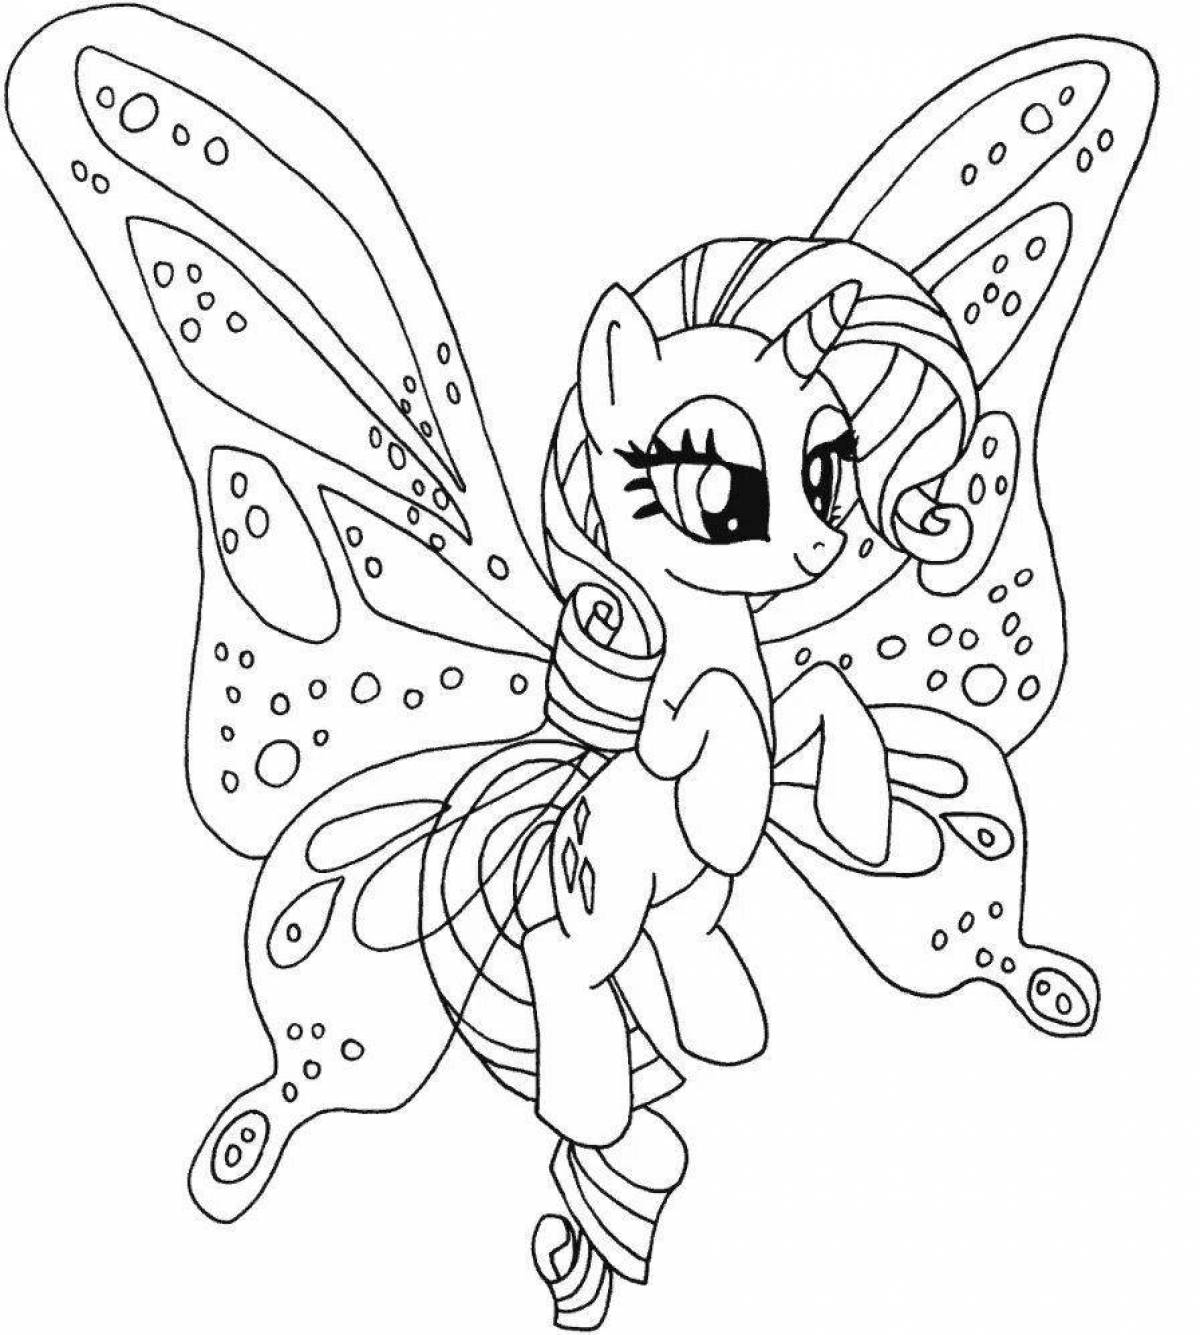 Cute little pony coloring book for kids